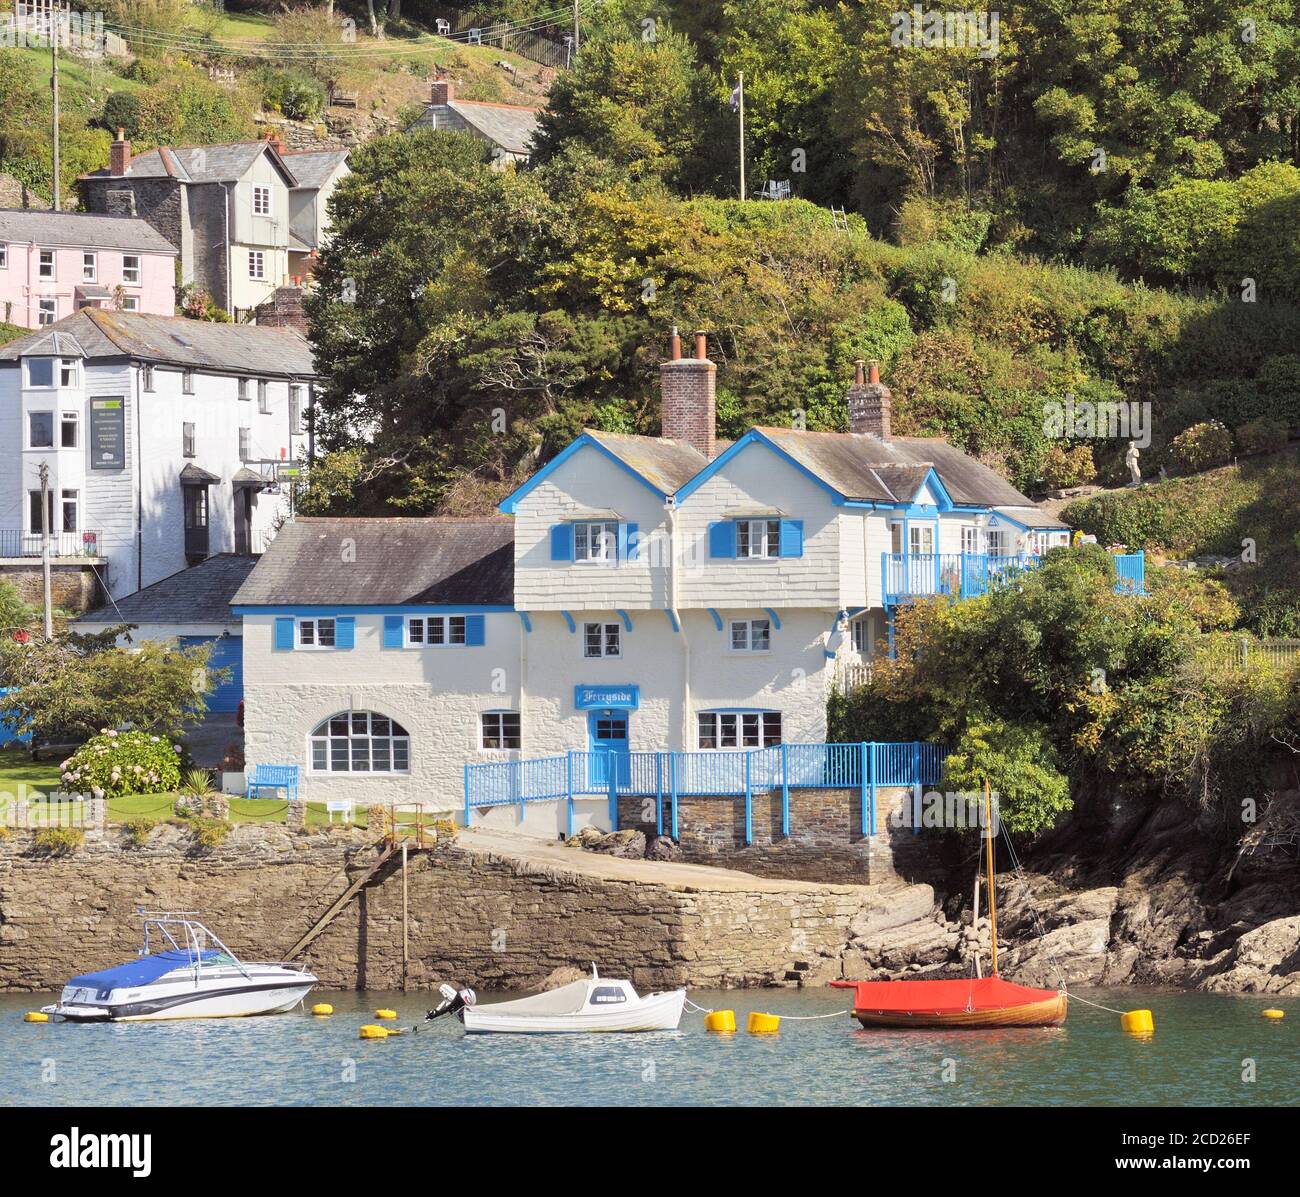 Ferryside house in Bodinnick the former home of celebrated author and playwright Daphne du Maurier, Lady Browning, DBE. River Fowey, Cornwall, UK Stock Photo